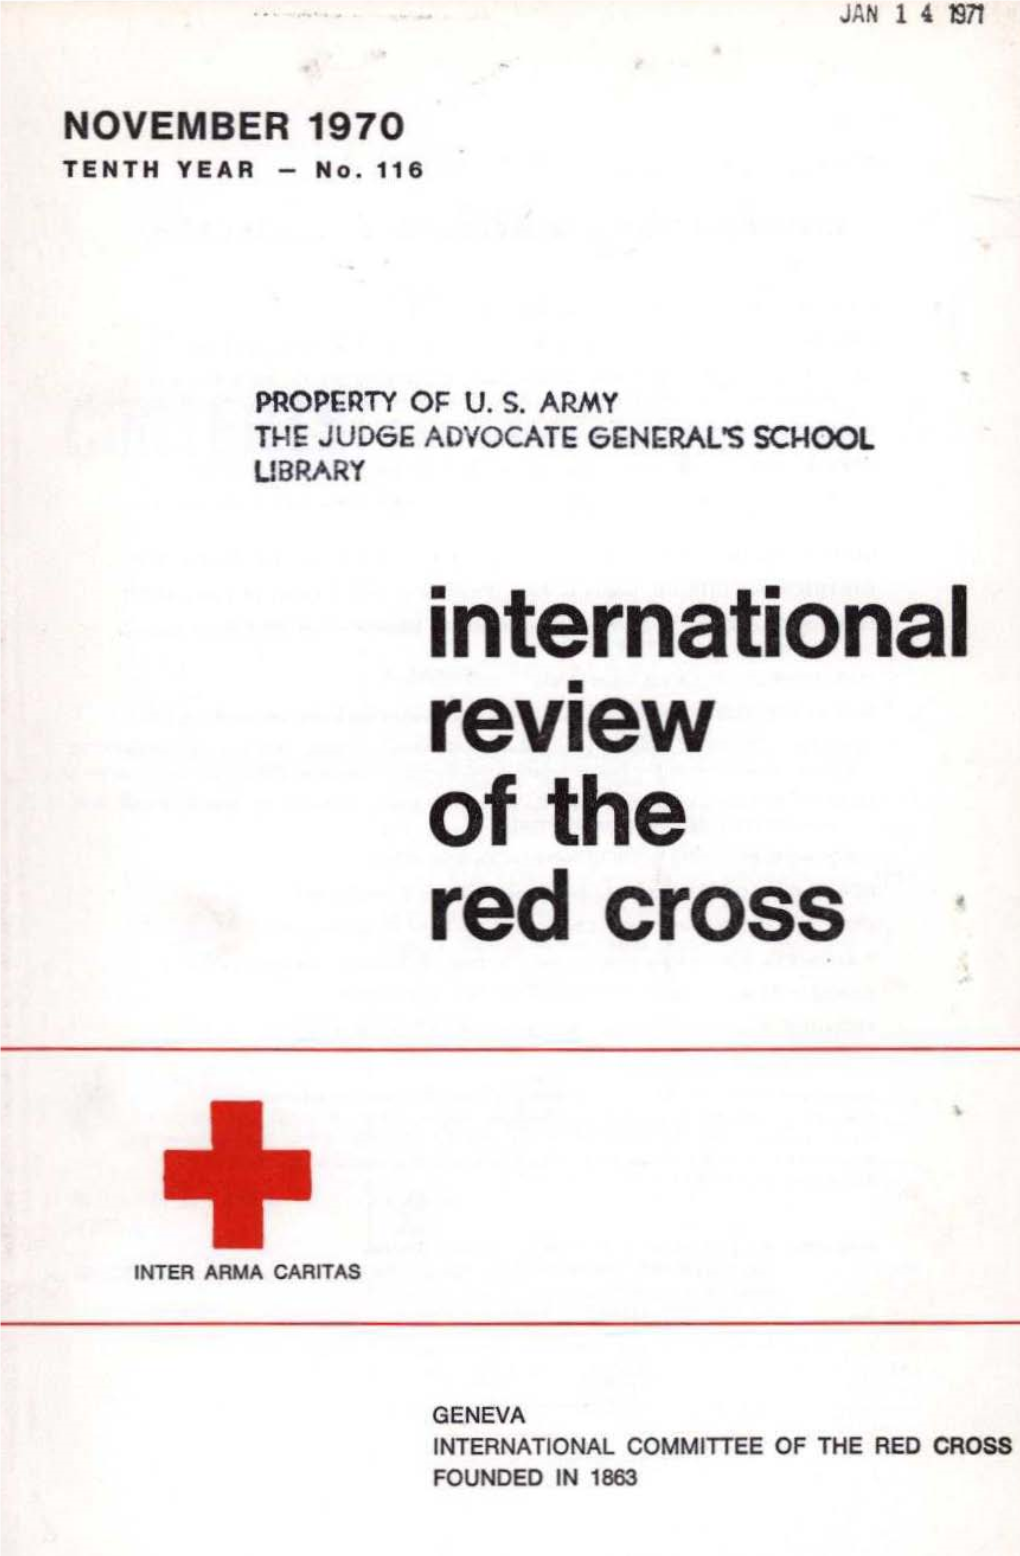 International Review of the Red Cross, November 1970, Tenth Year